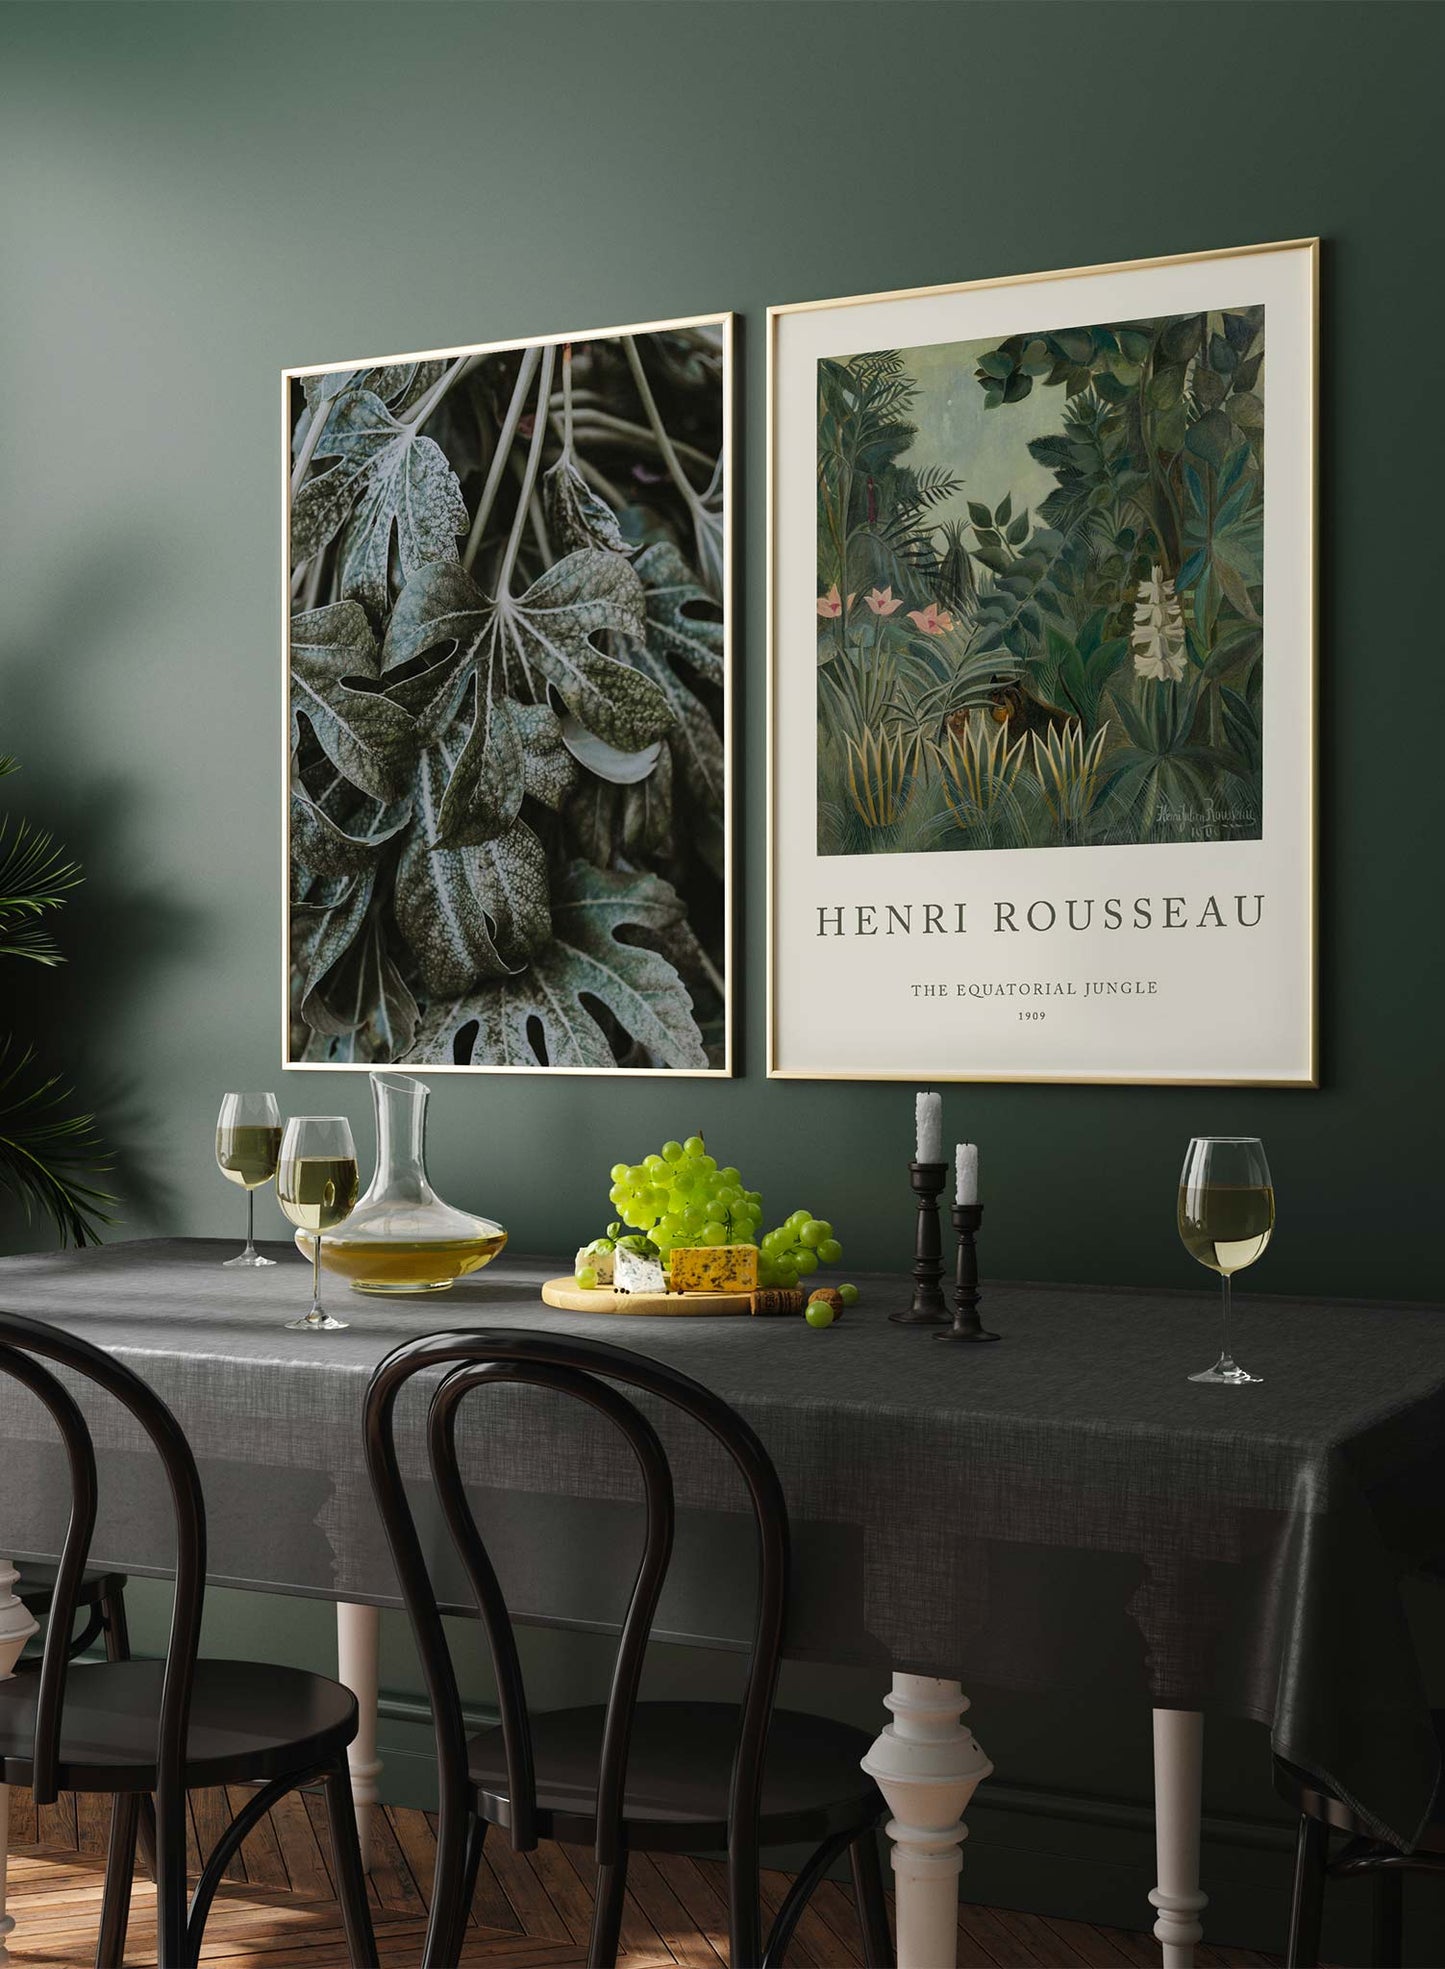 Equatorial Jungle is a minimalist illustration of Henri Rousseau's The Equatorial Jungle painting framed with its information by Opposite Wall.